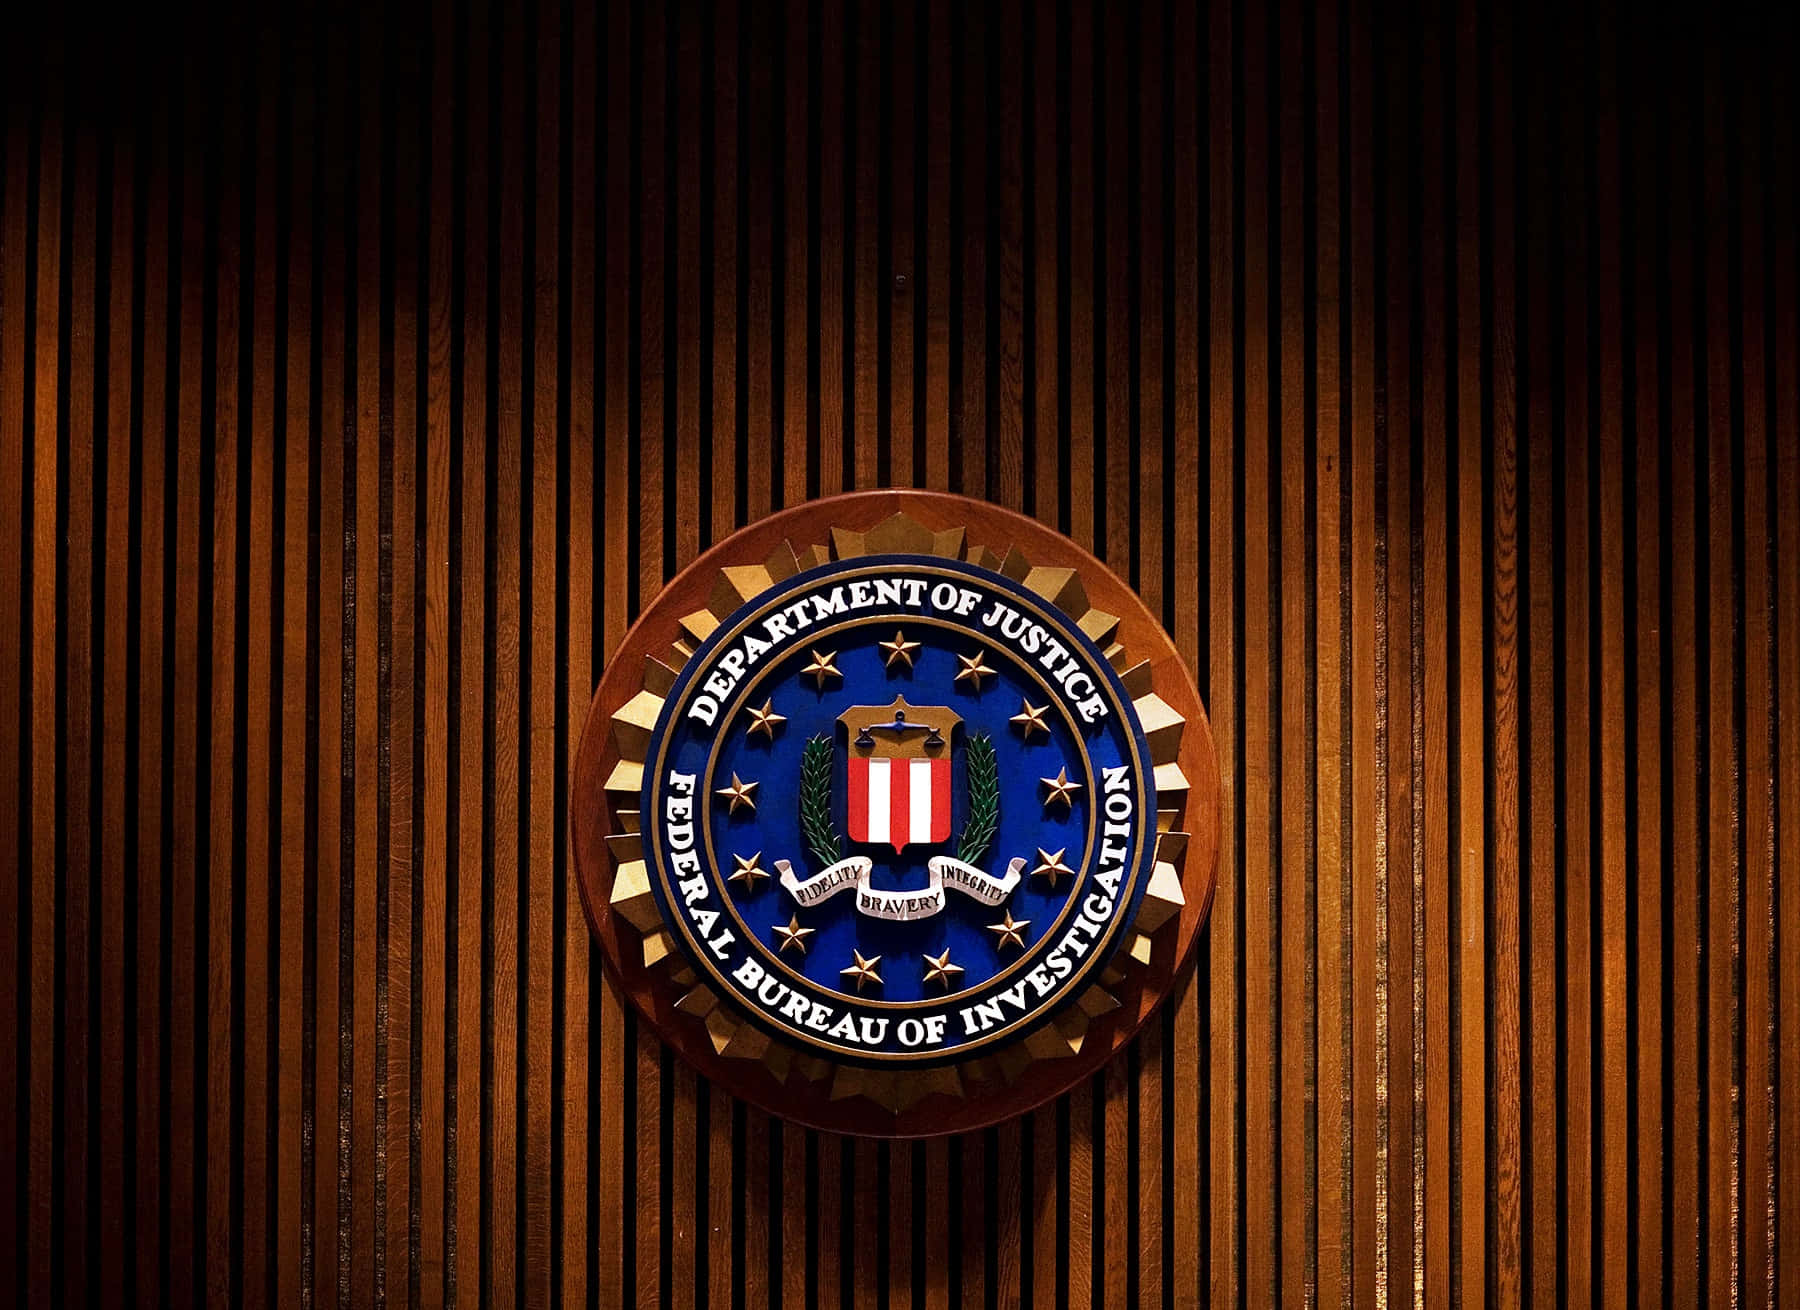 The Fbi Logo Is On A Wooden Wall